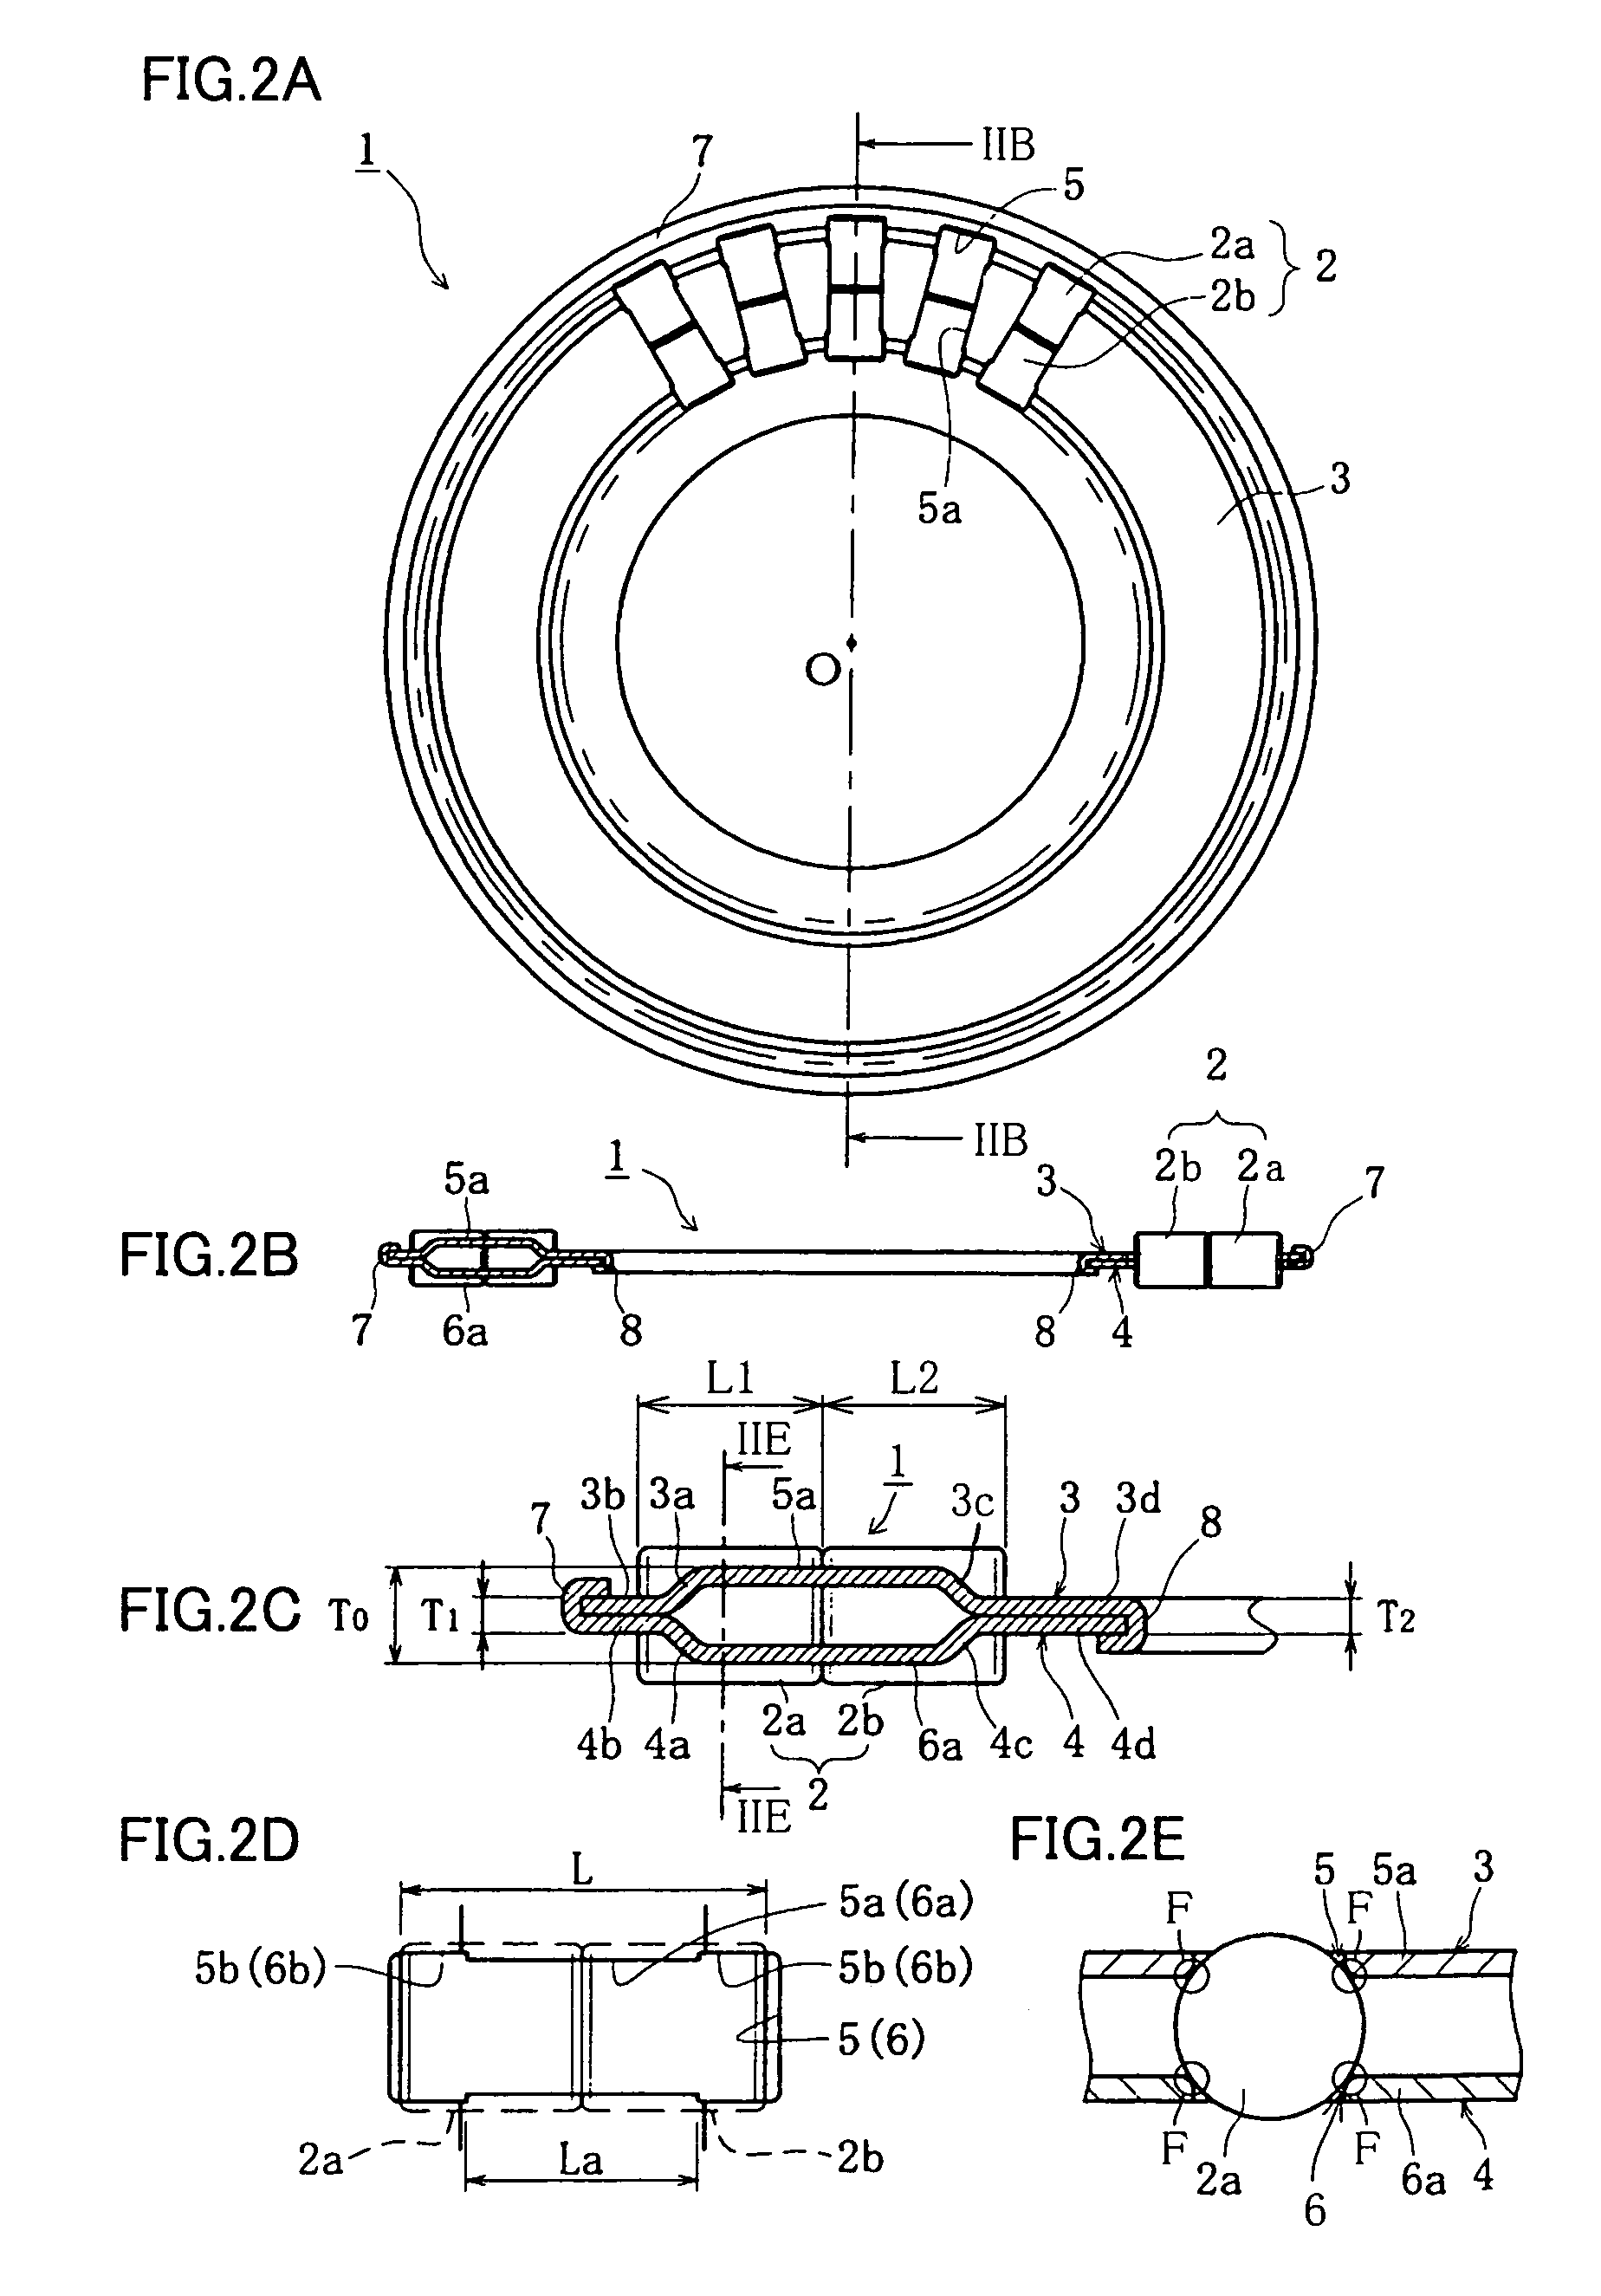 Support structure carrying thrust load of compressor and thrust needle roller bearing